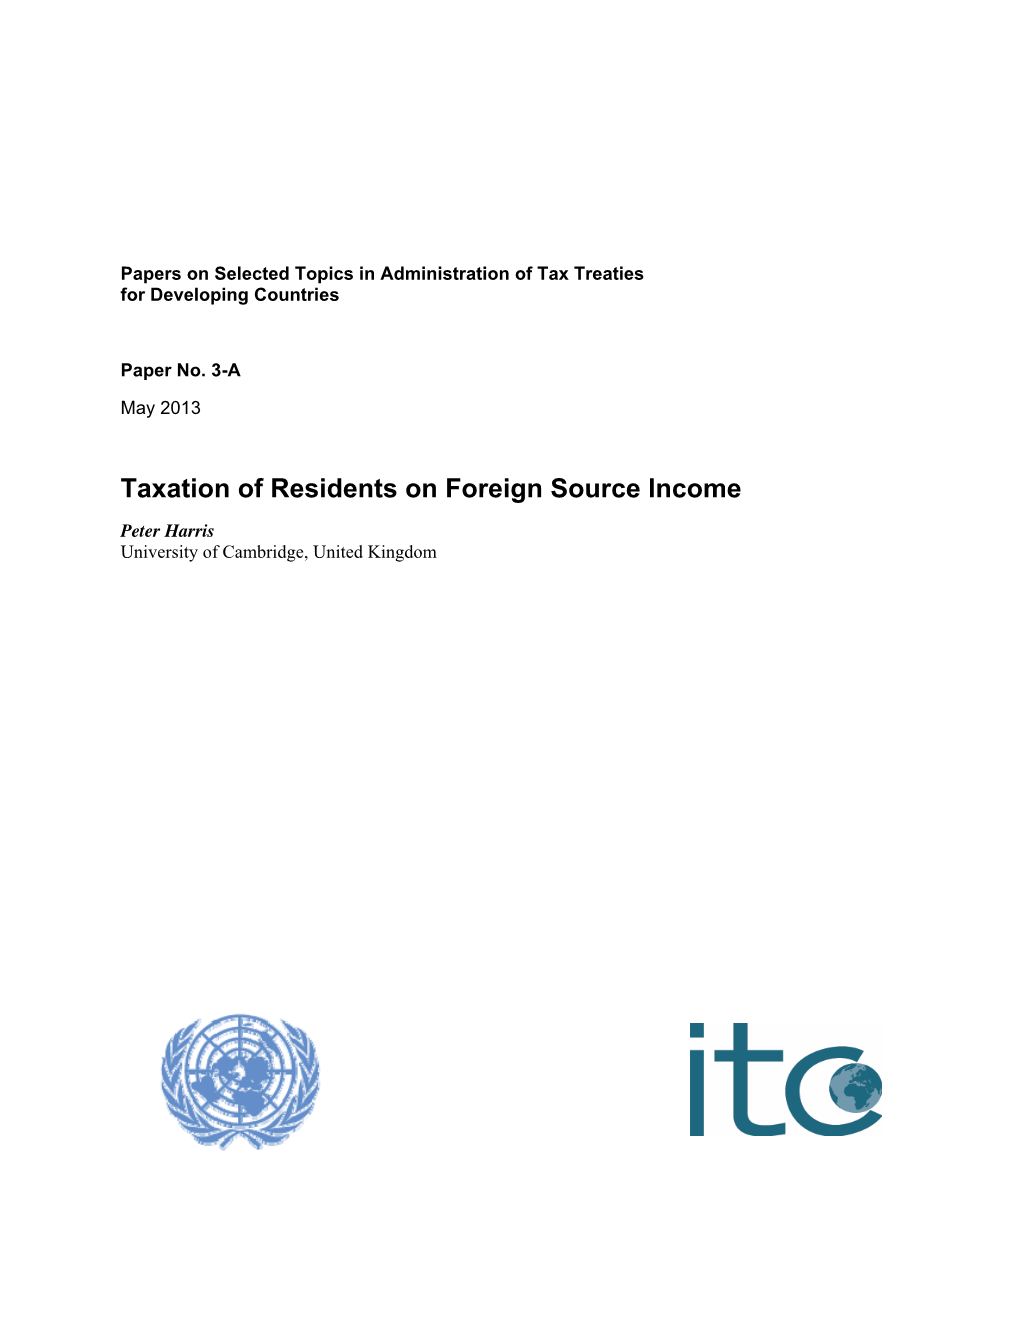 Paper 3-A, Taxation of Residents on Foreign Source Income